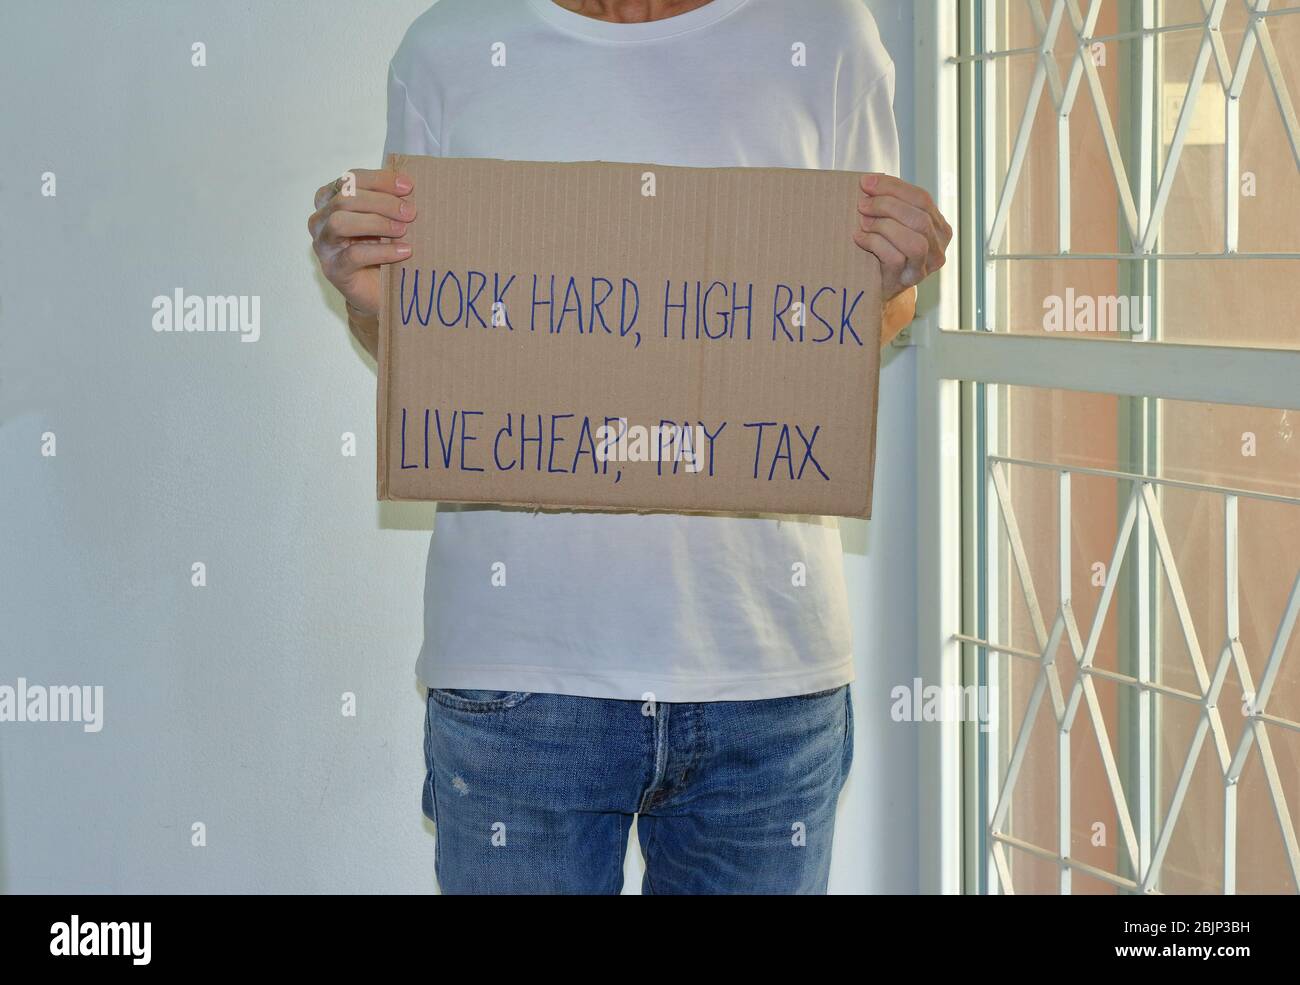 A worker holding cardboard sign read WORK HARD, HIGH RISK, LIVE CHEAP, PAY TAX, demonstration concept Stock Photo